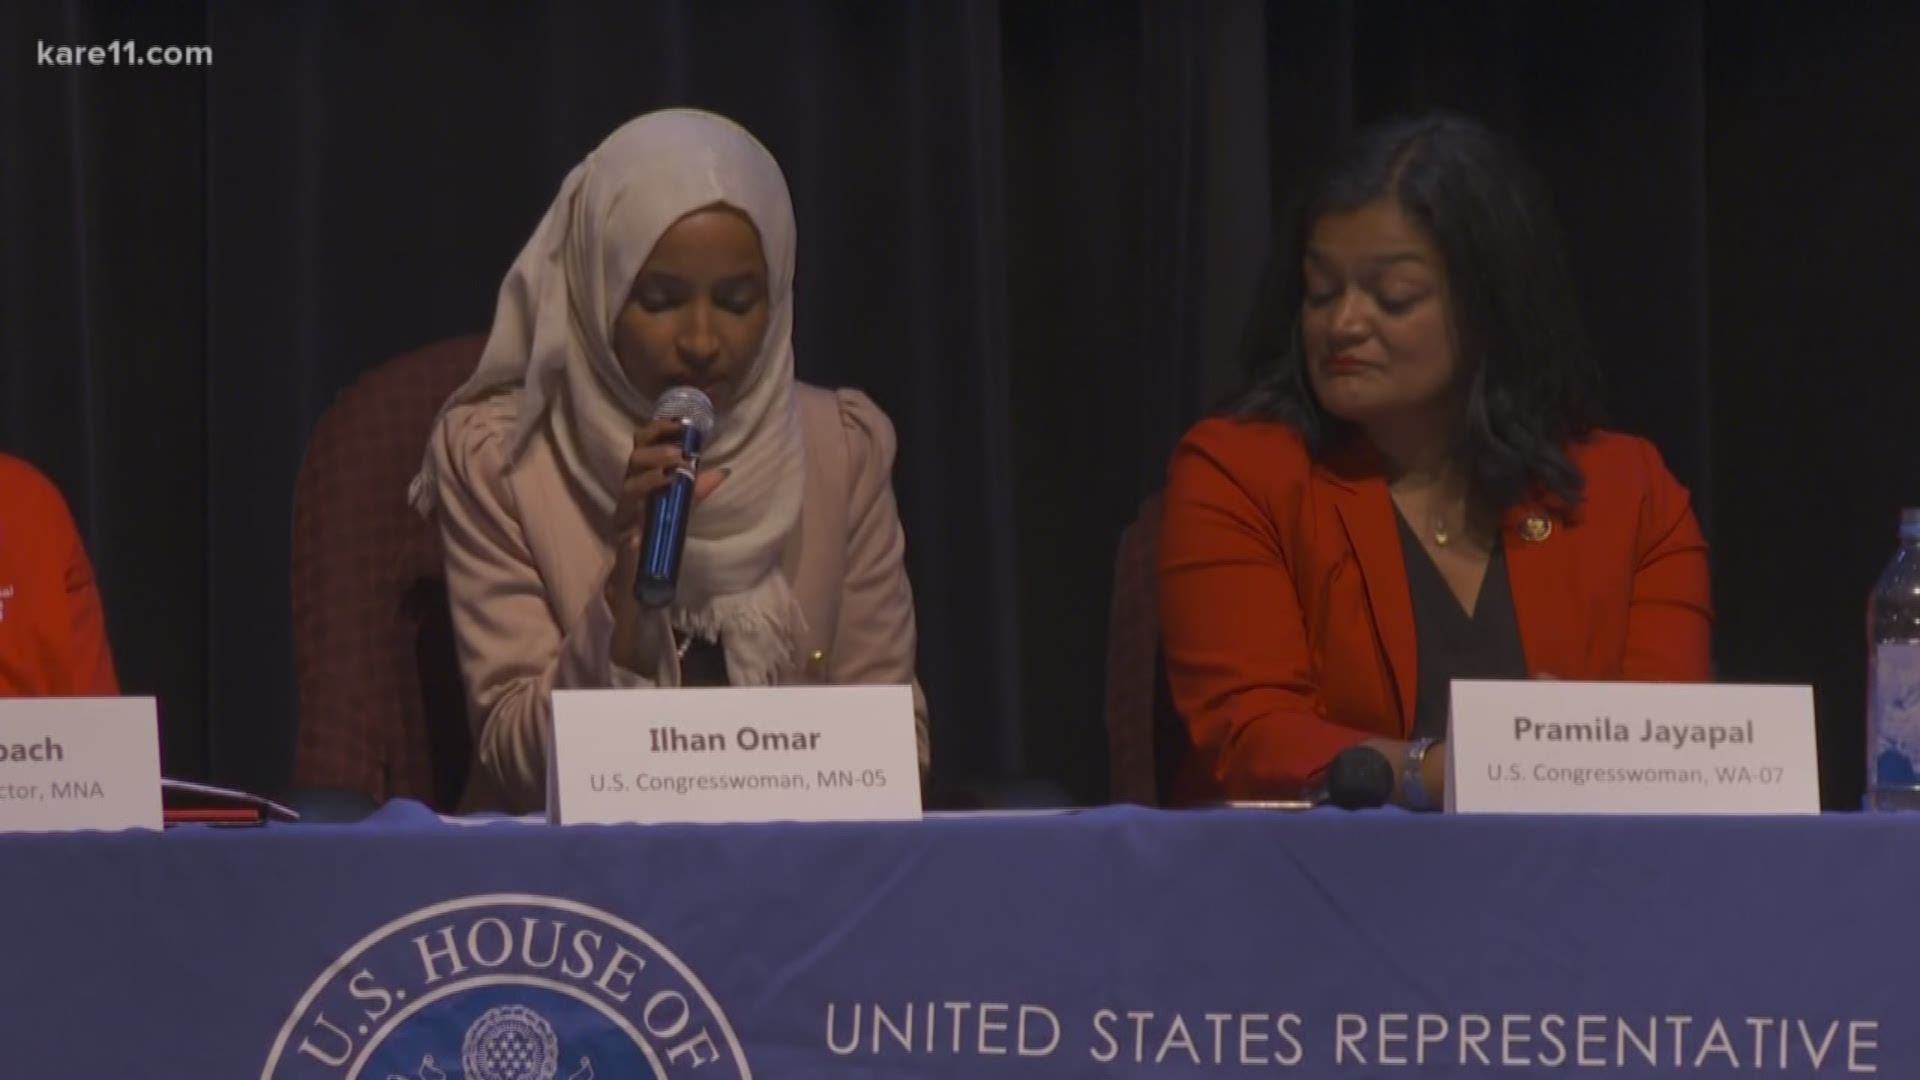 Representative Ilhan Omar is back in Minnesota and meeting with her supporters.